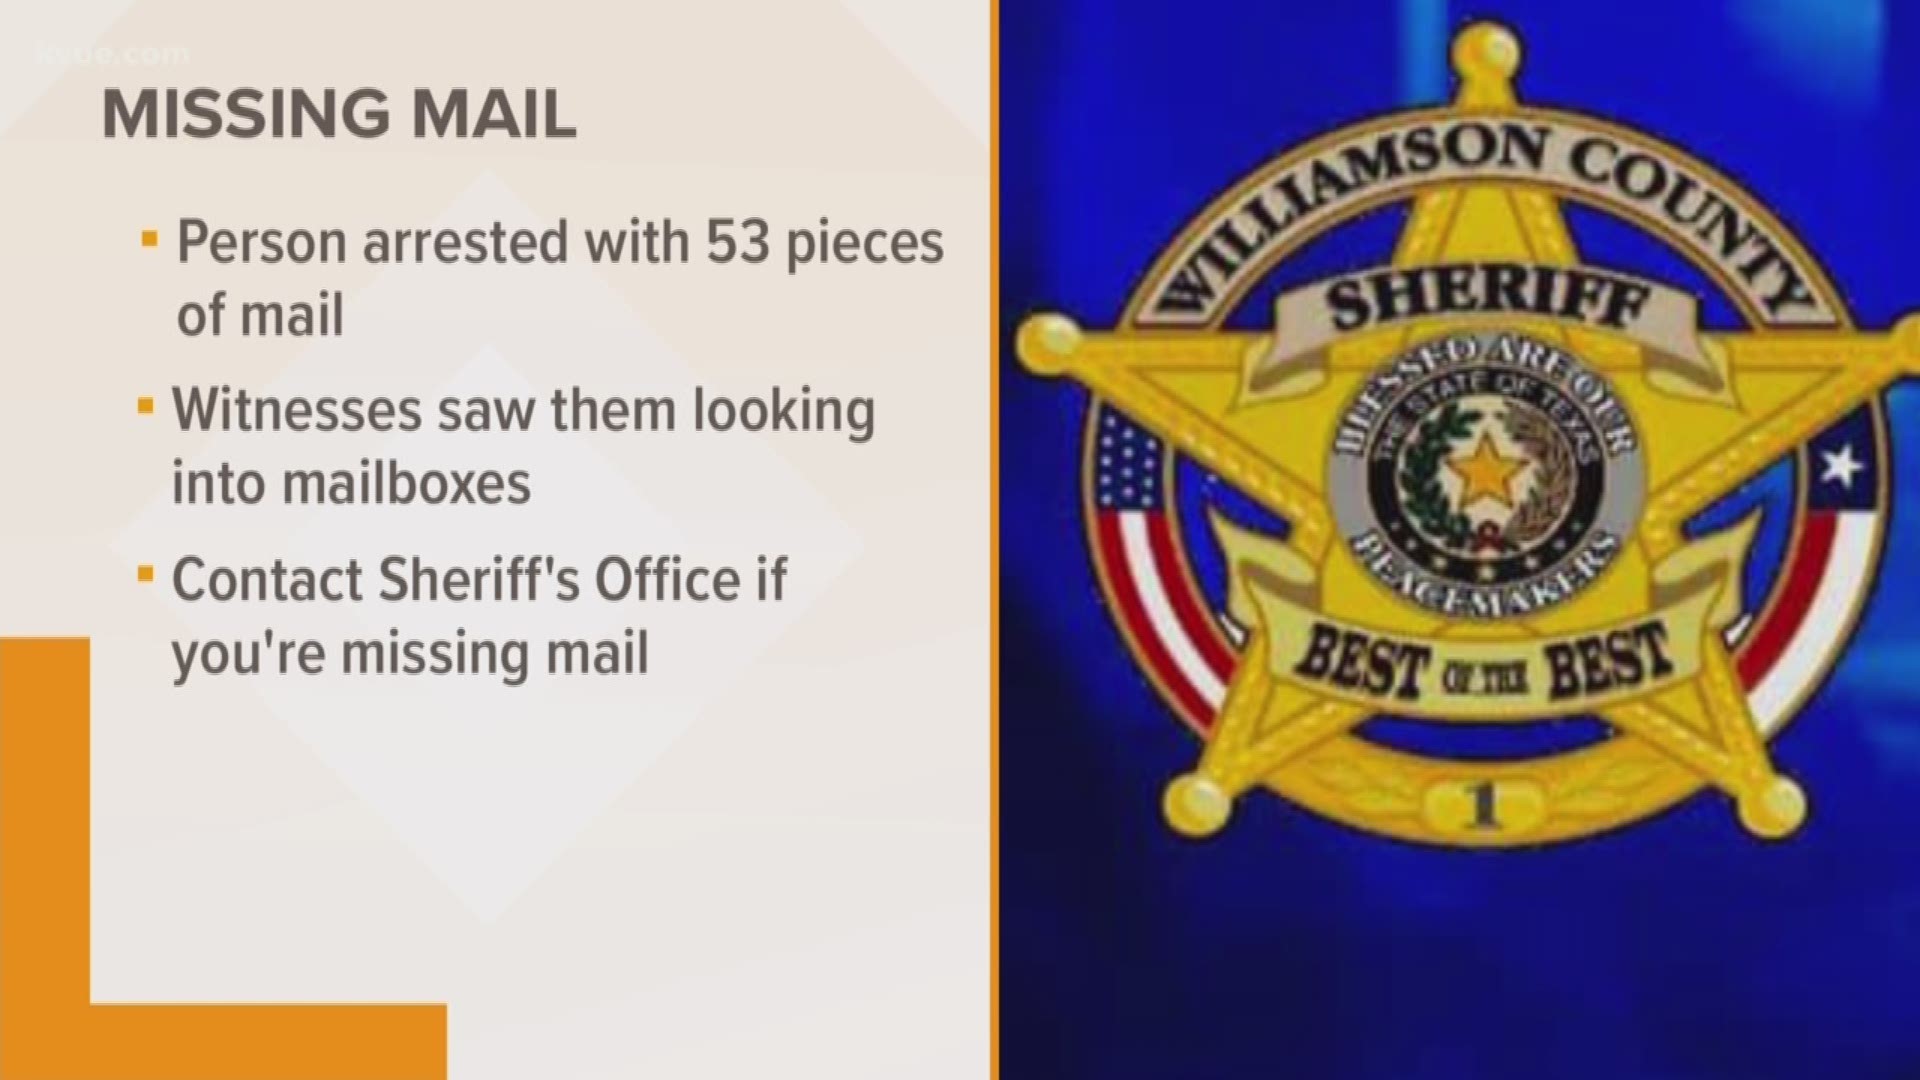 Williamson County Sheriff's Office deputies said they arrested someone Saturday night who had 53 pieces of mail from 19 different places.